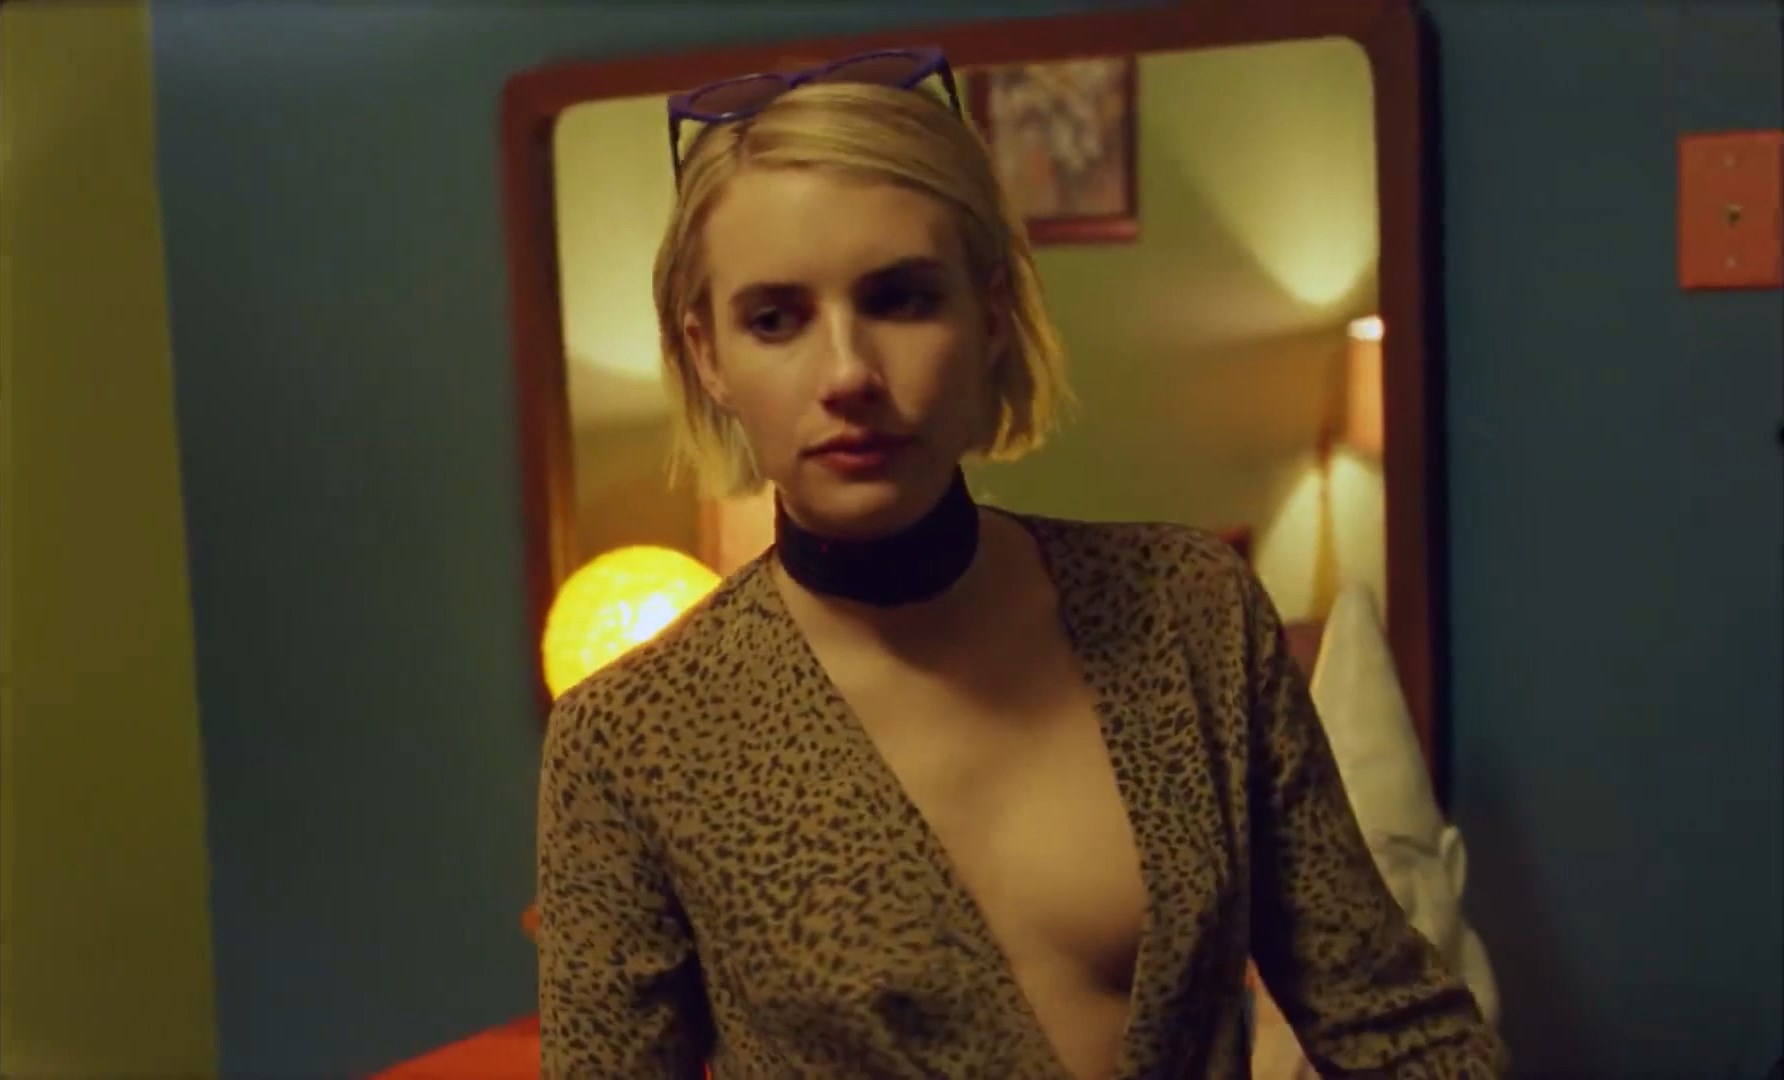 Watch Online - Emma Roberts - Time of Day (2018) HD 1080p